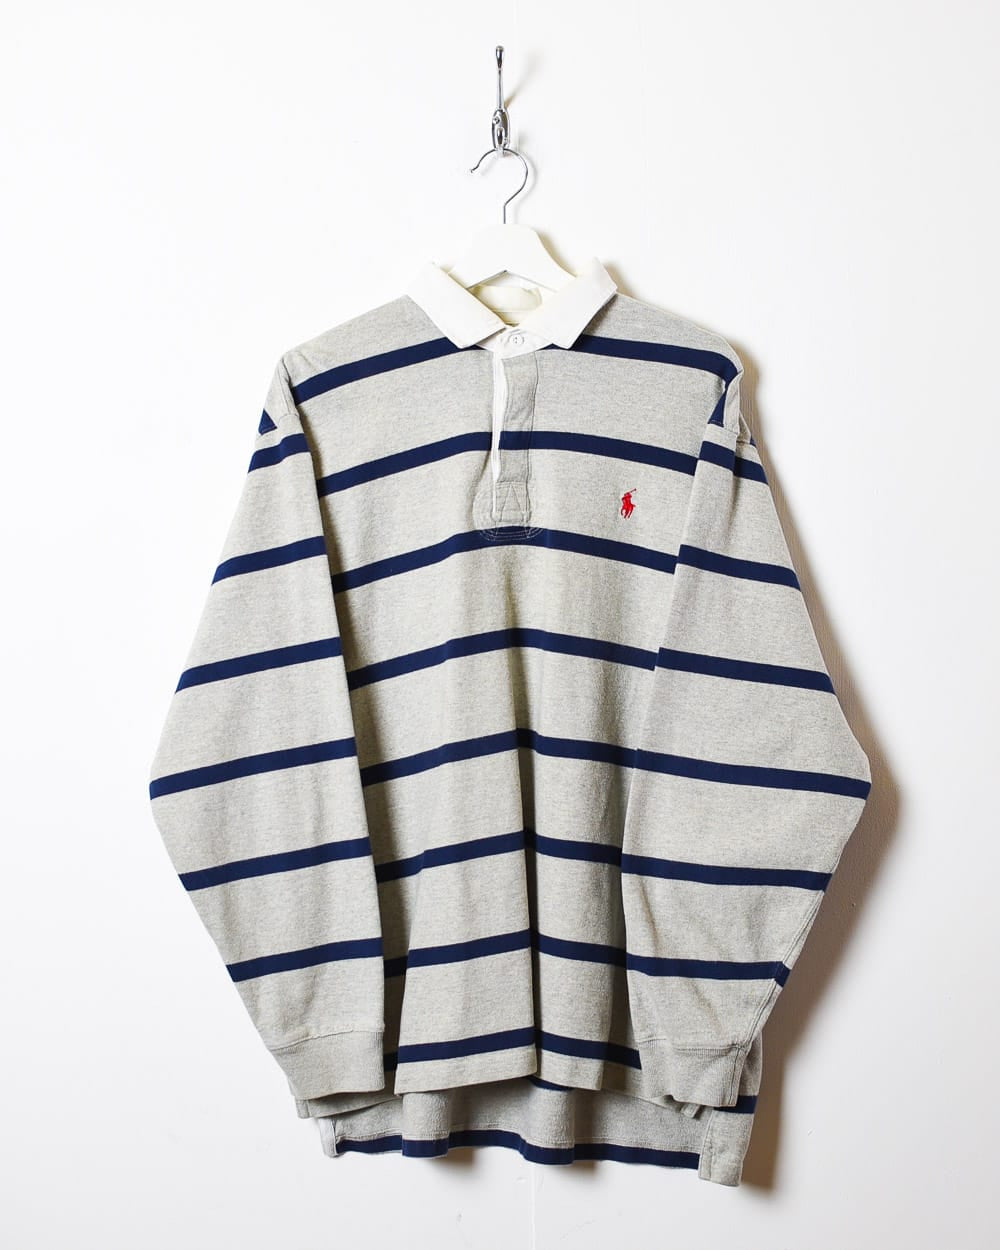 Stone Polo Ralph Lauren Striped Rugby Shirt - Large